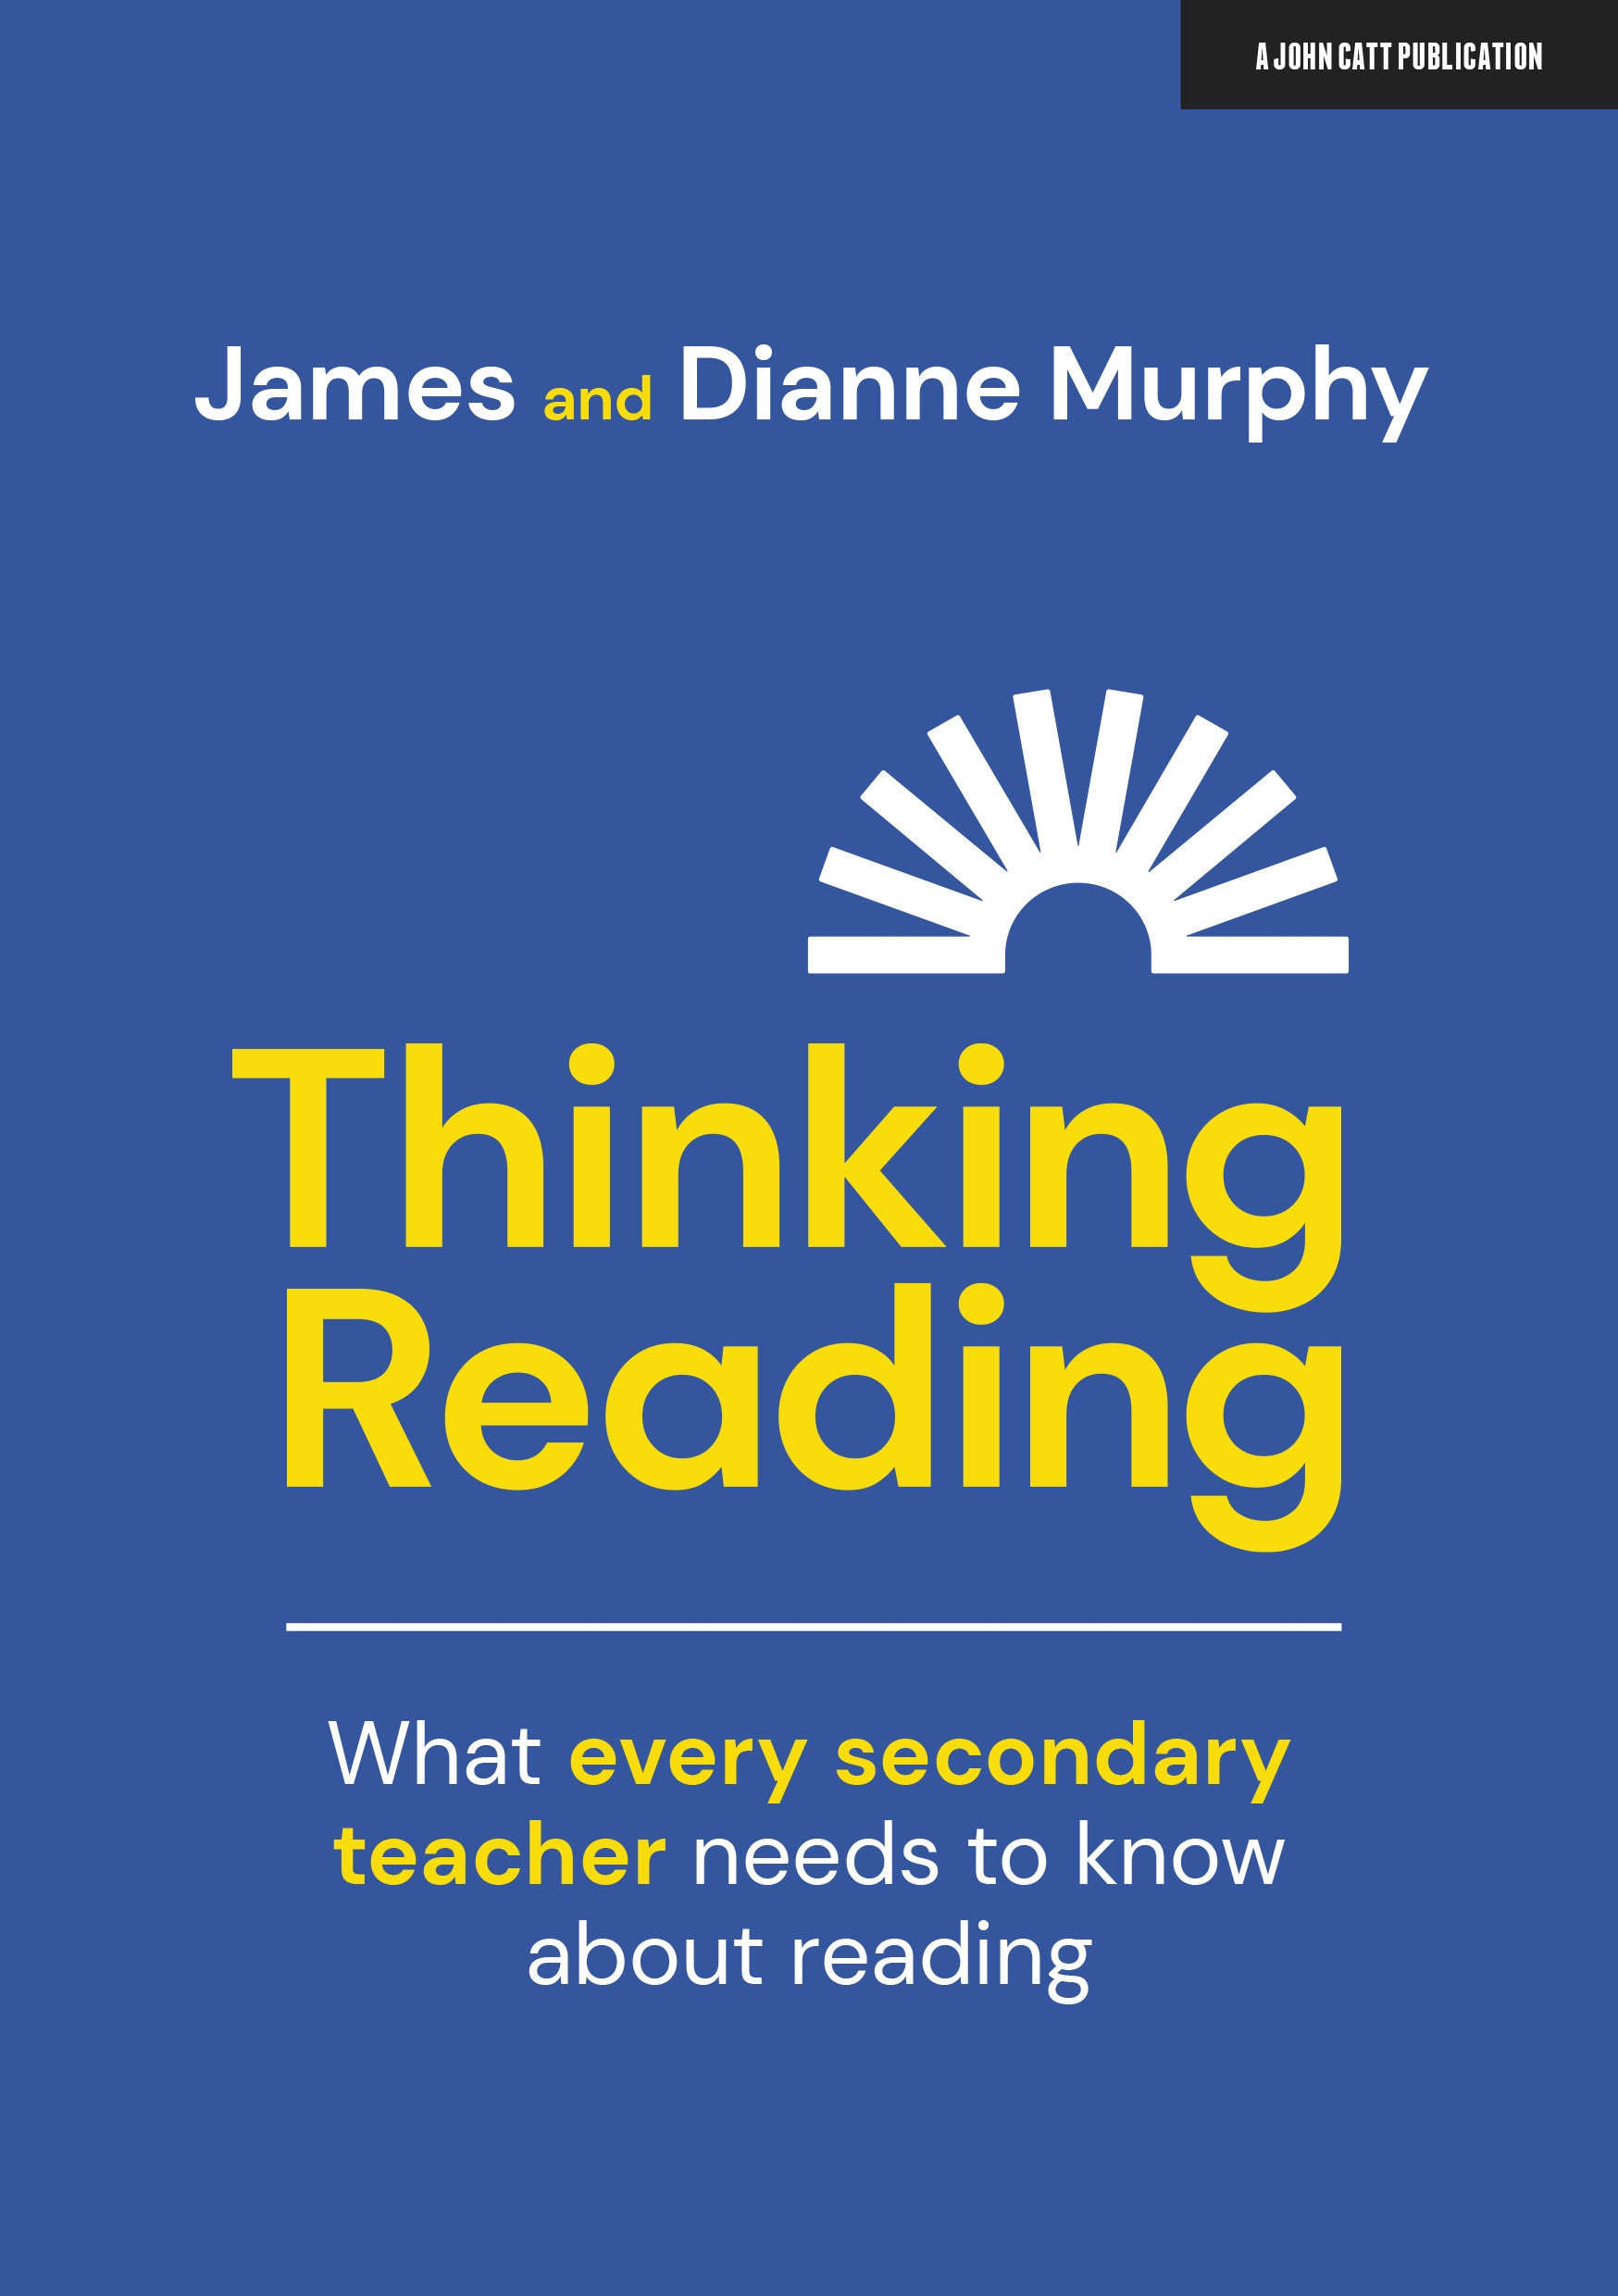 Featured image for “Thinking Reading: What every secondary teacher needs to know about reading”